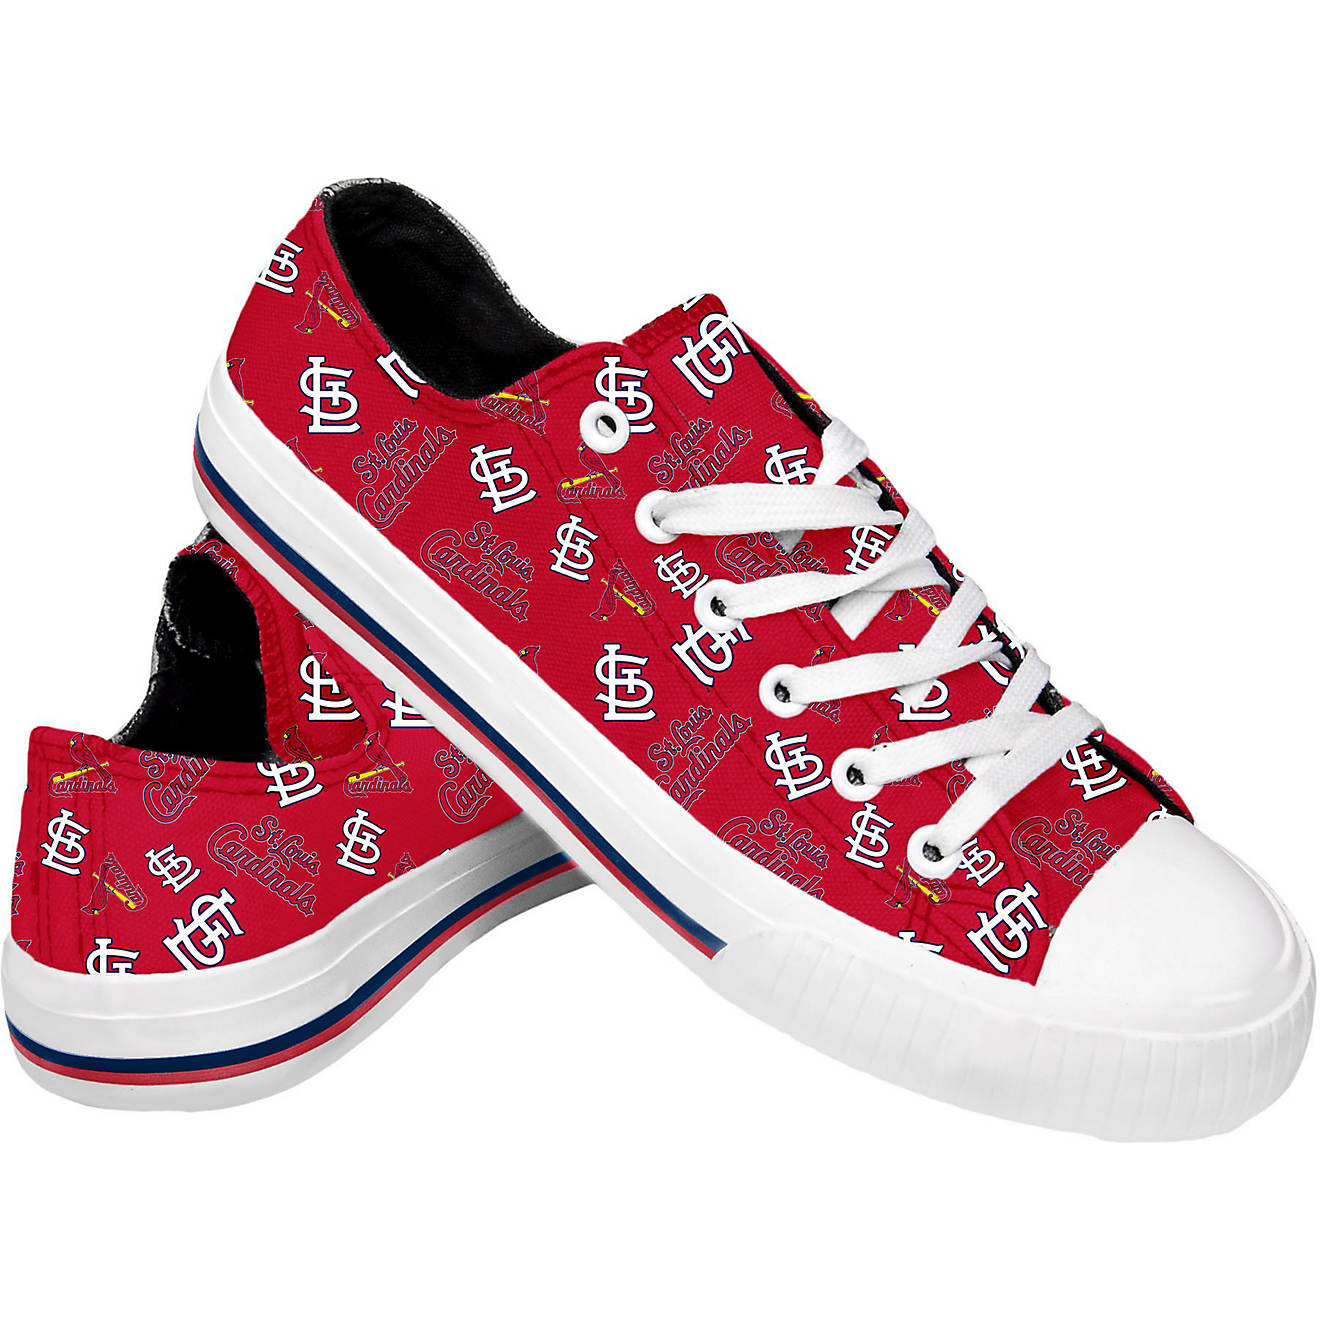 St Louis Cardinals MLB Team Row One Men 7.5 Women 9 Sneakers shoes